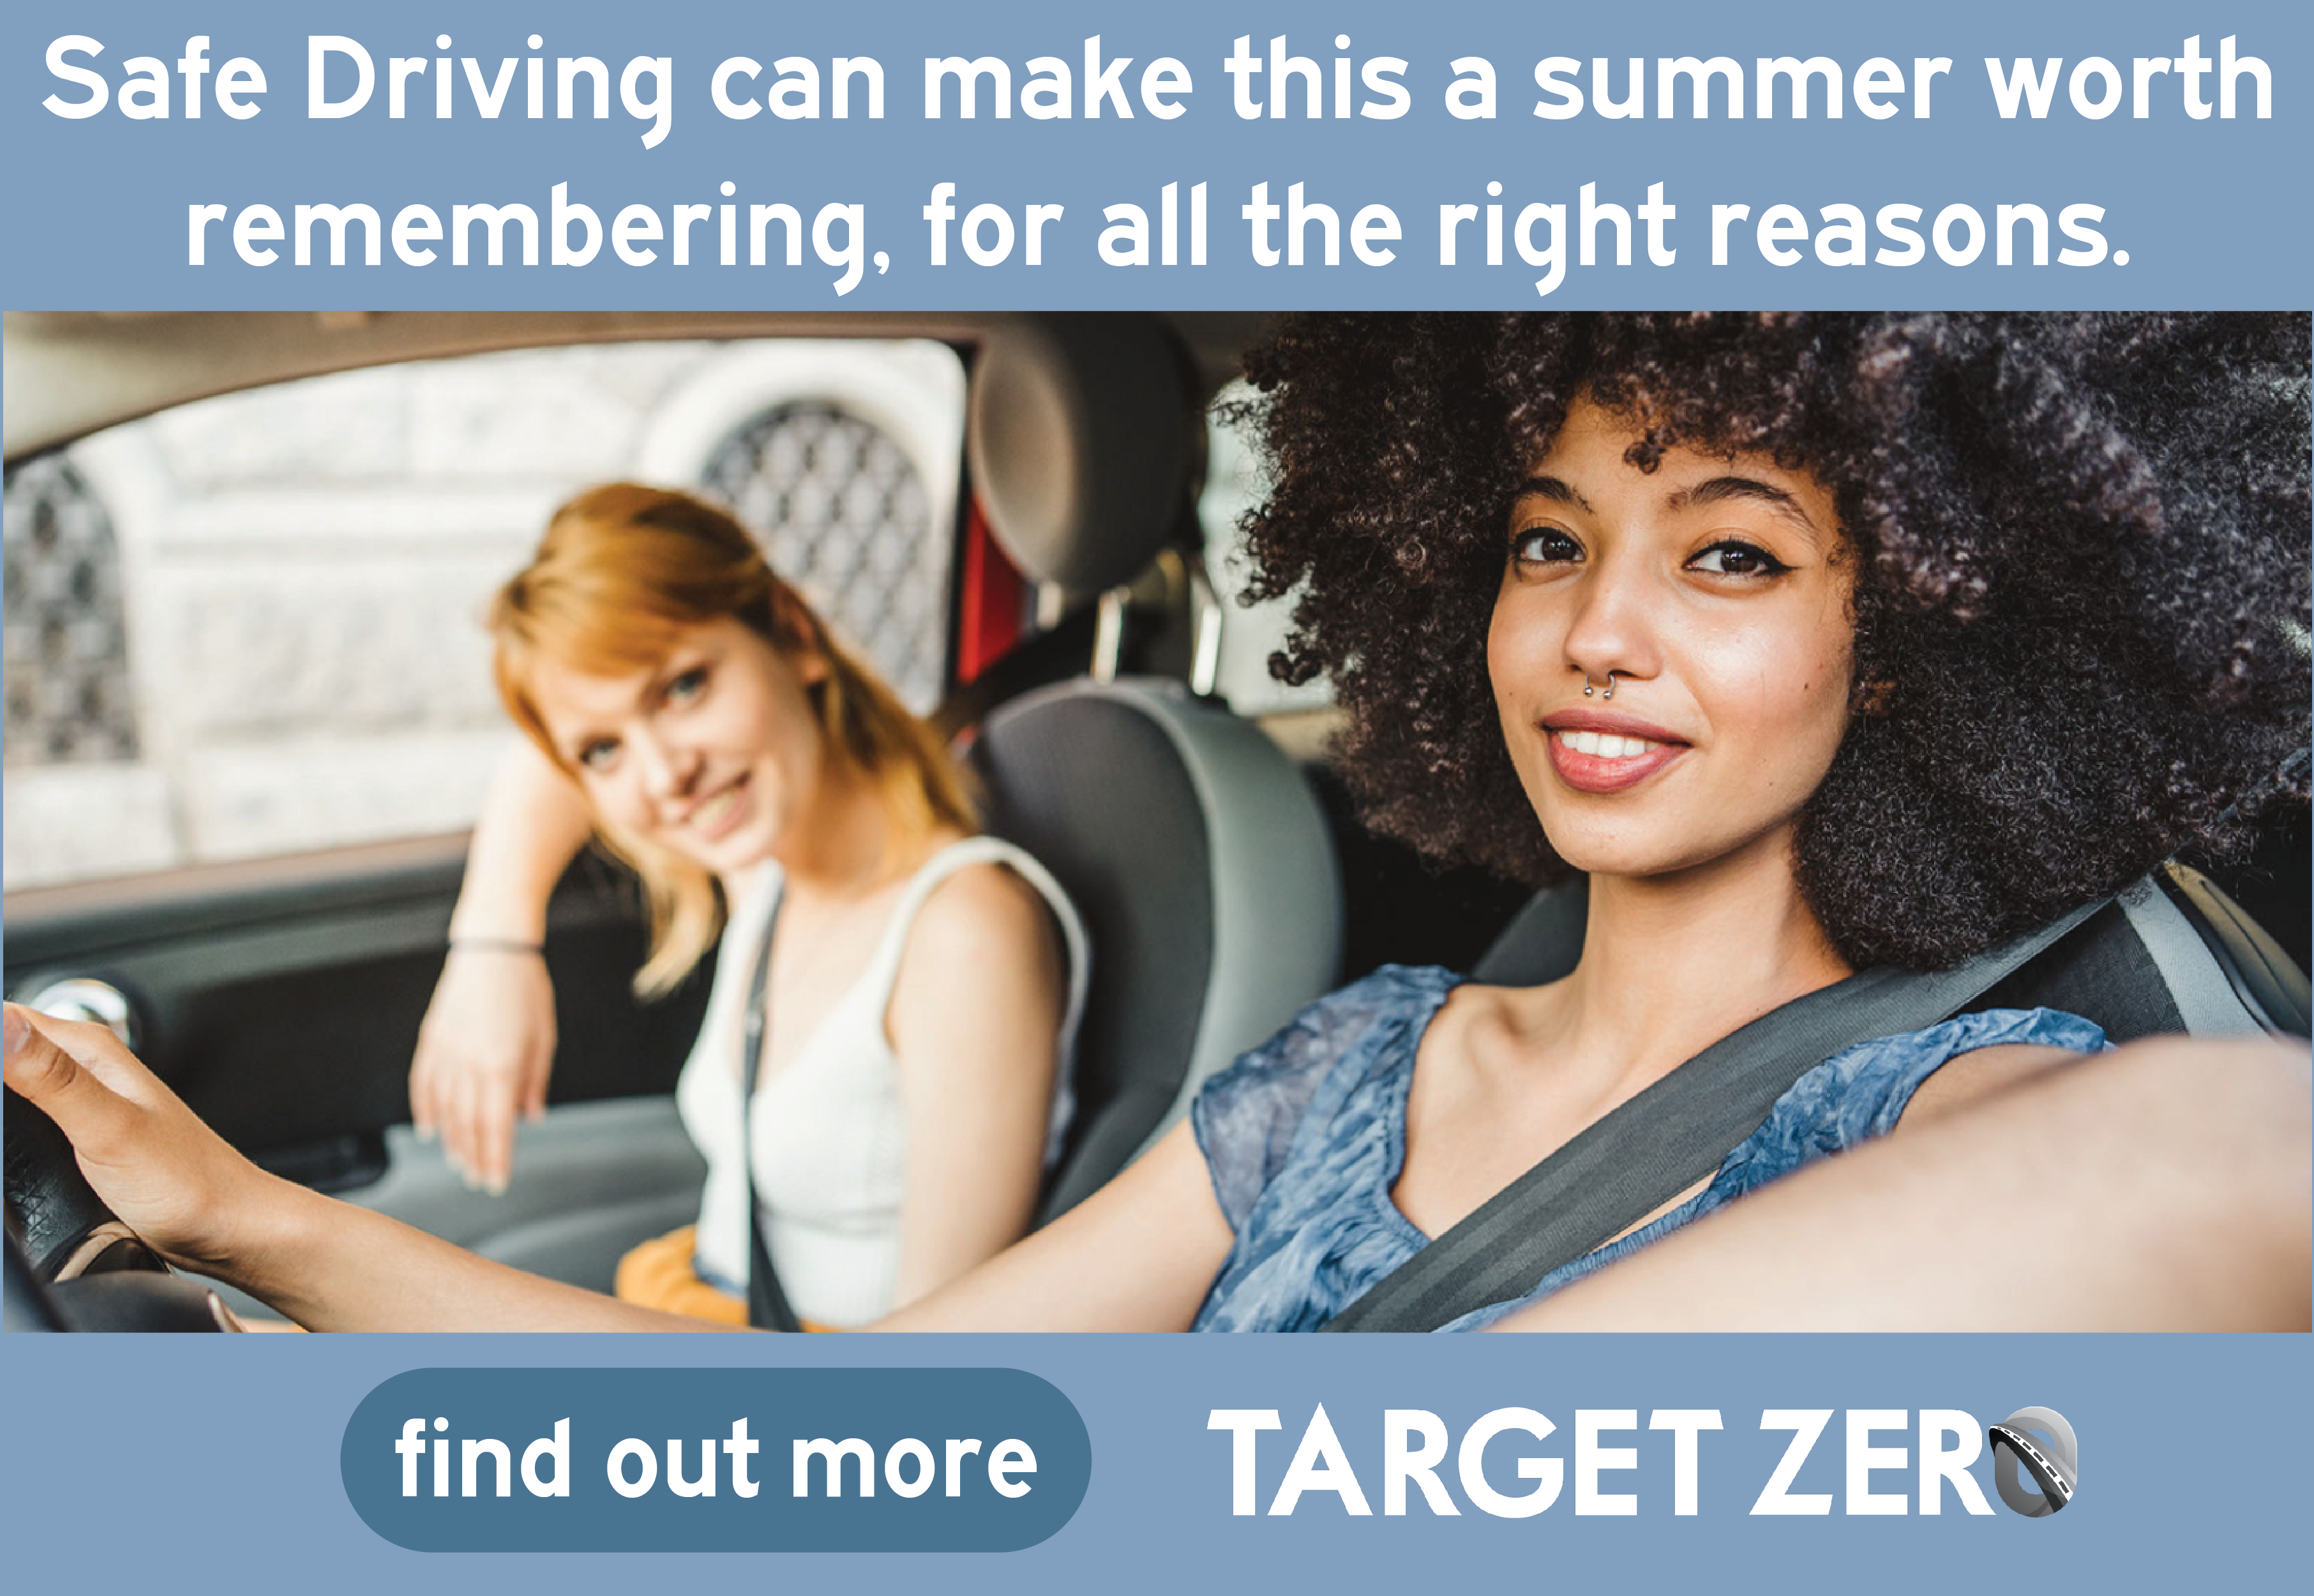 Two individuals in a car; the person on the right is driving and smiling towards the camera, the person on the left is looking at the driver with a smile. The text above reads, "Safe Driving can make this a summer worth remembering, for all the right reasons." Below is a button labeled "find out more" and the logo for Target Zero.